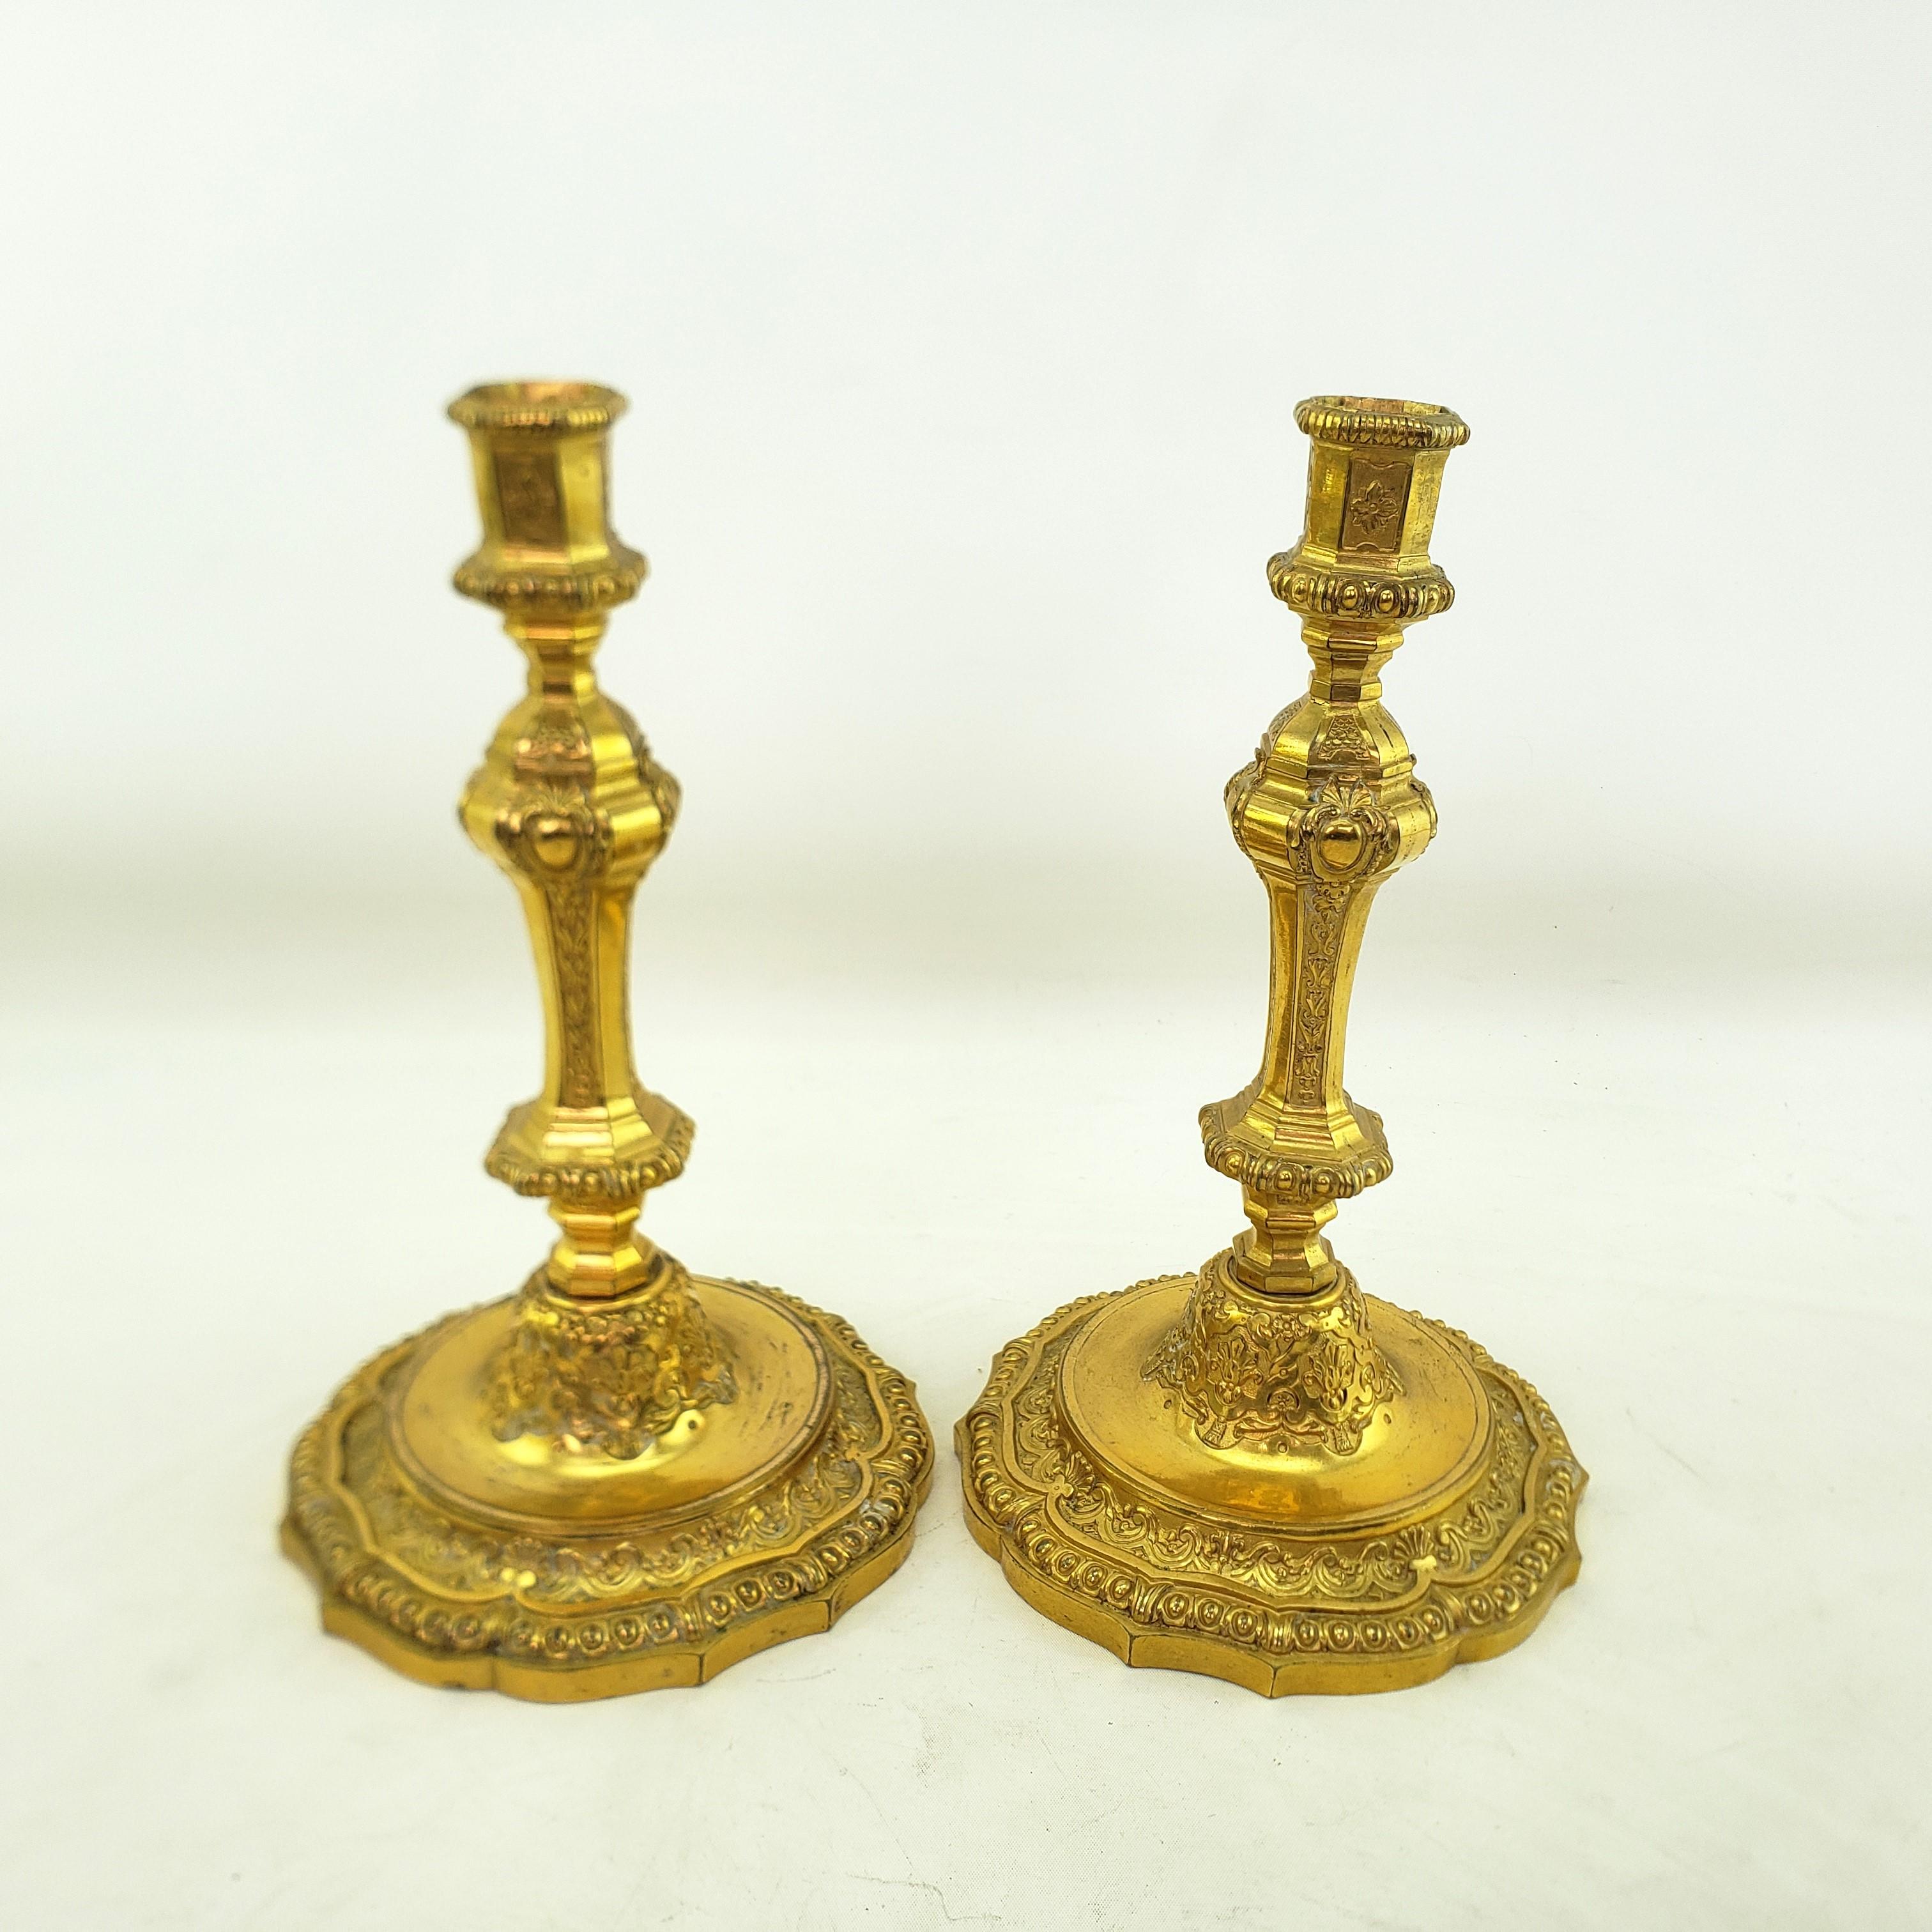 French Pair of Antique Louis XIV Styled Gilt Bronze Candlesticks with Stylized Flowers For Sale